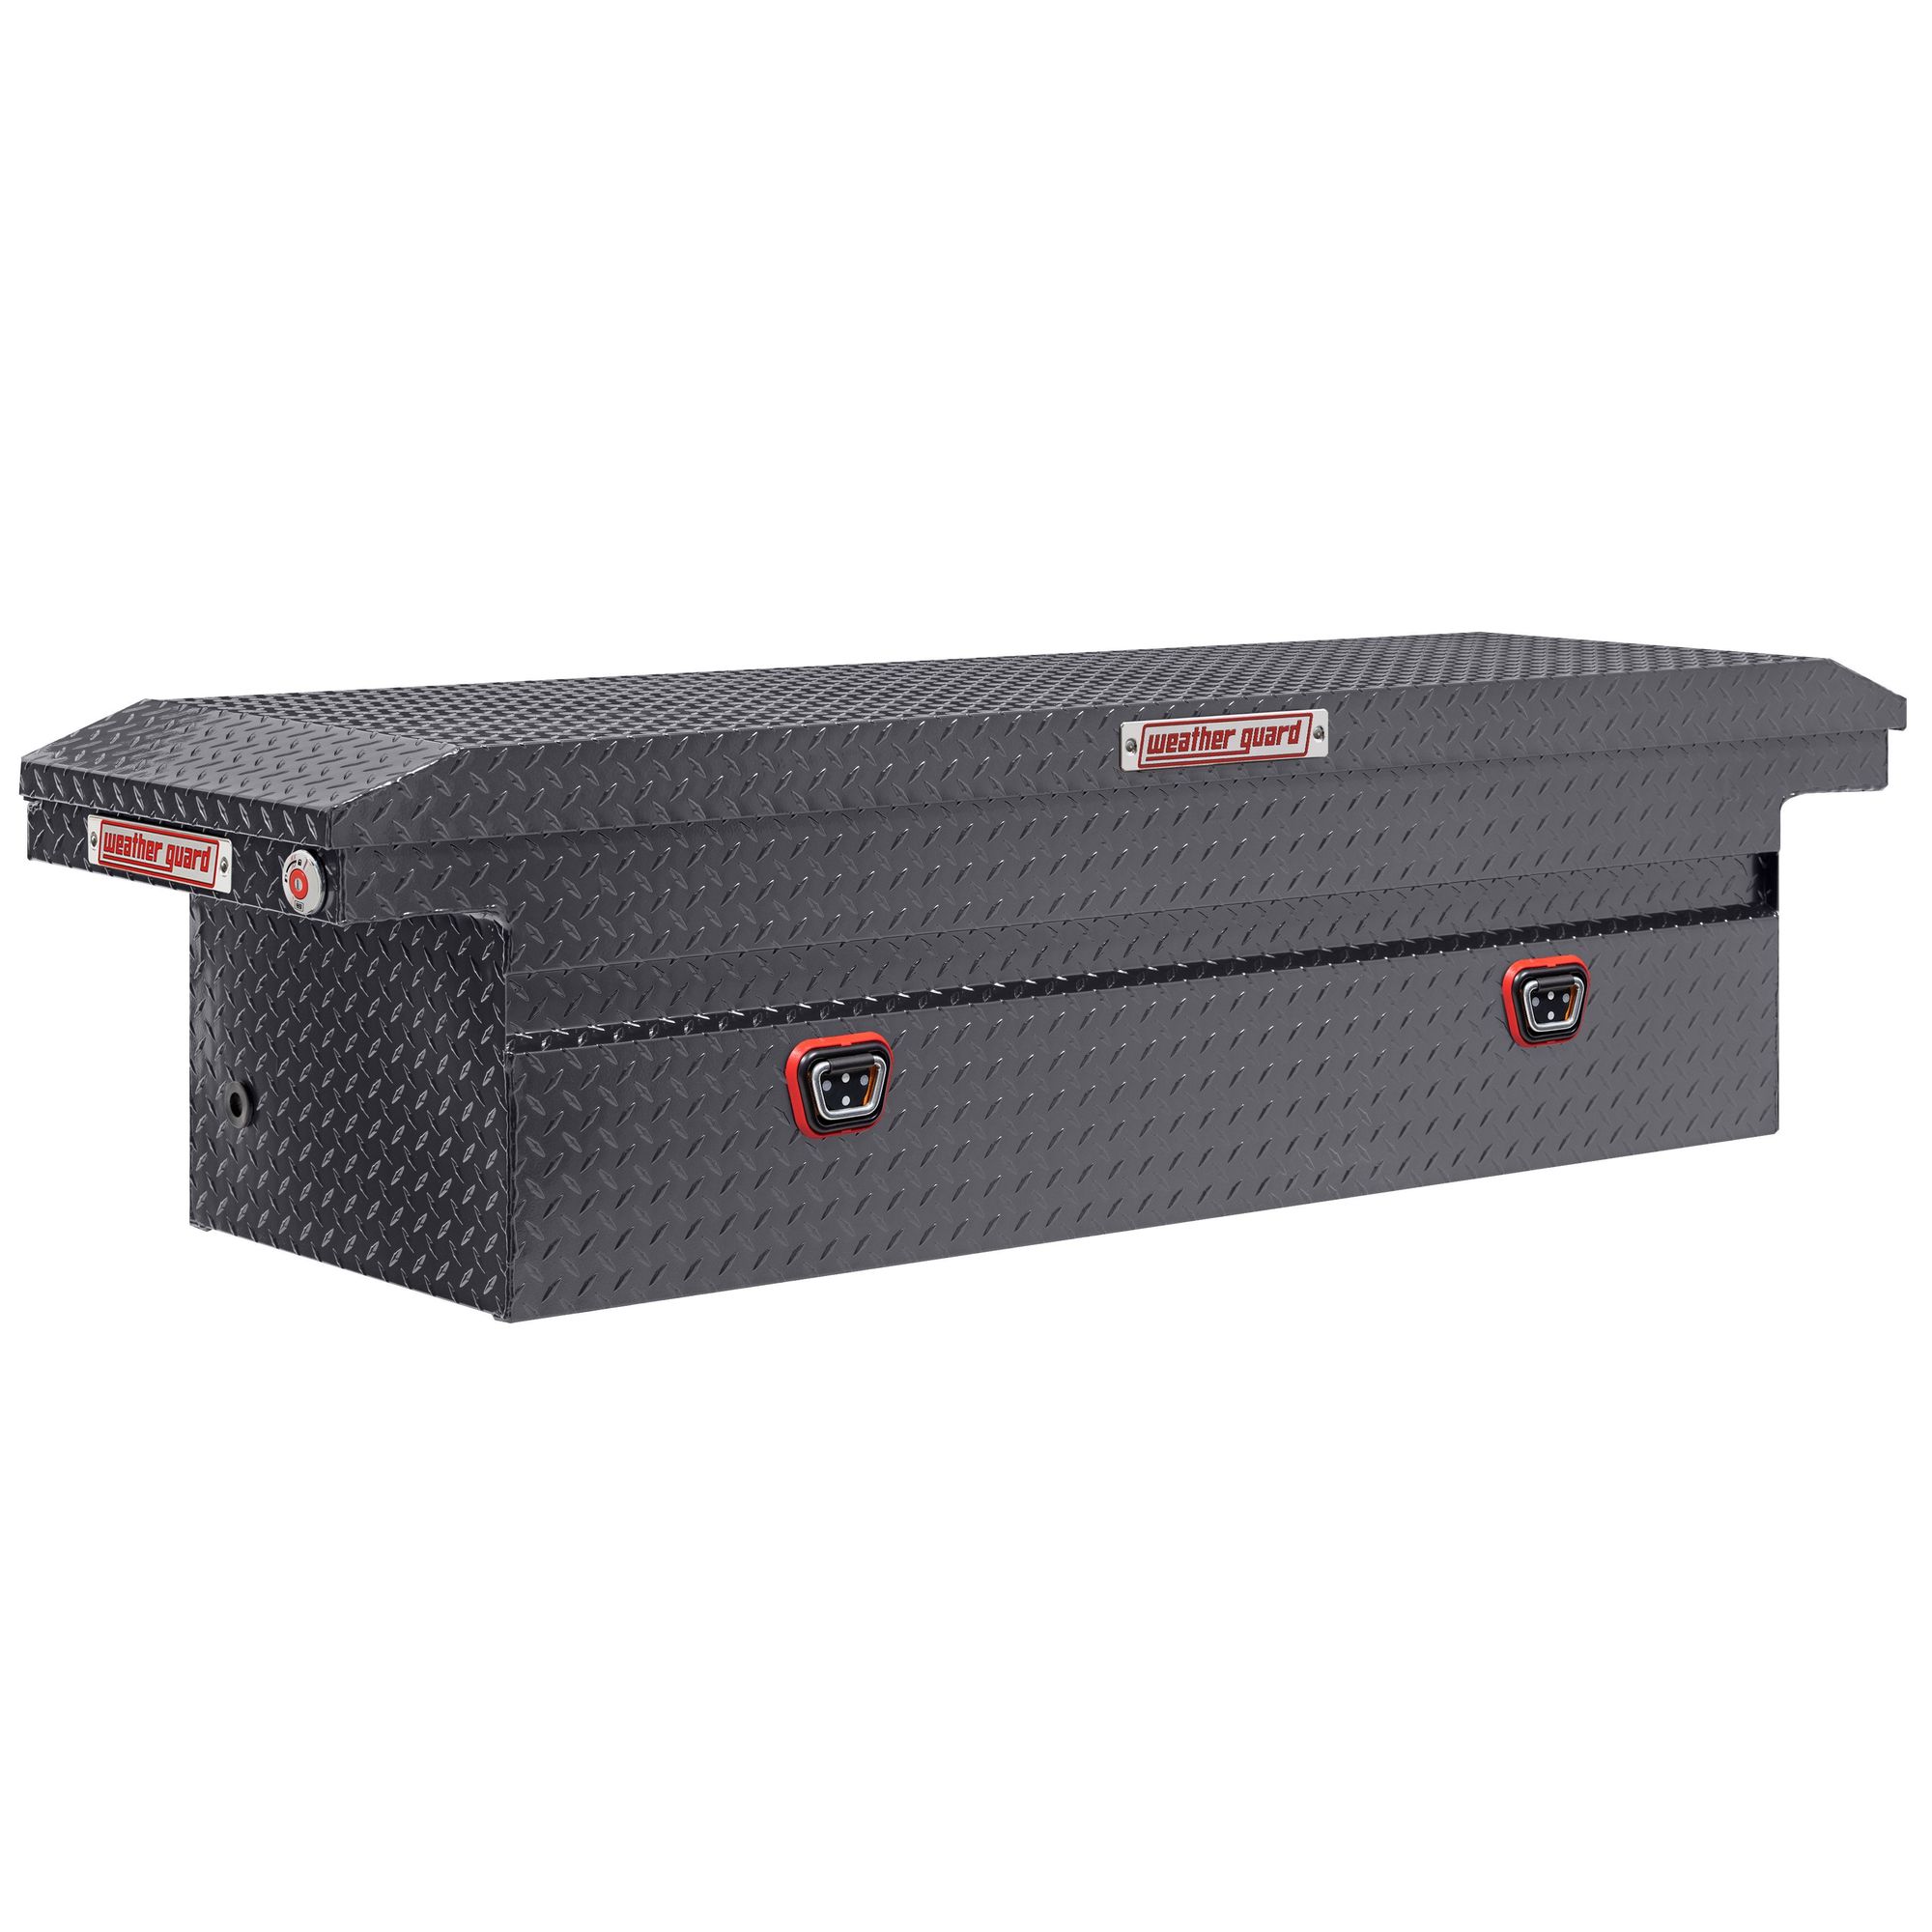 Weather Guard, 71Inch L Saddle Box, Full Low Profile, Width 72 in, Material Aluminum, Color Finish Gray, Model 121-6-04